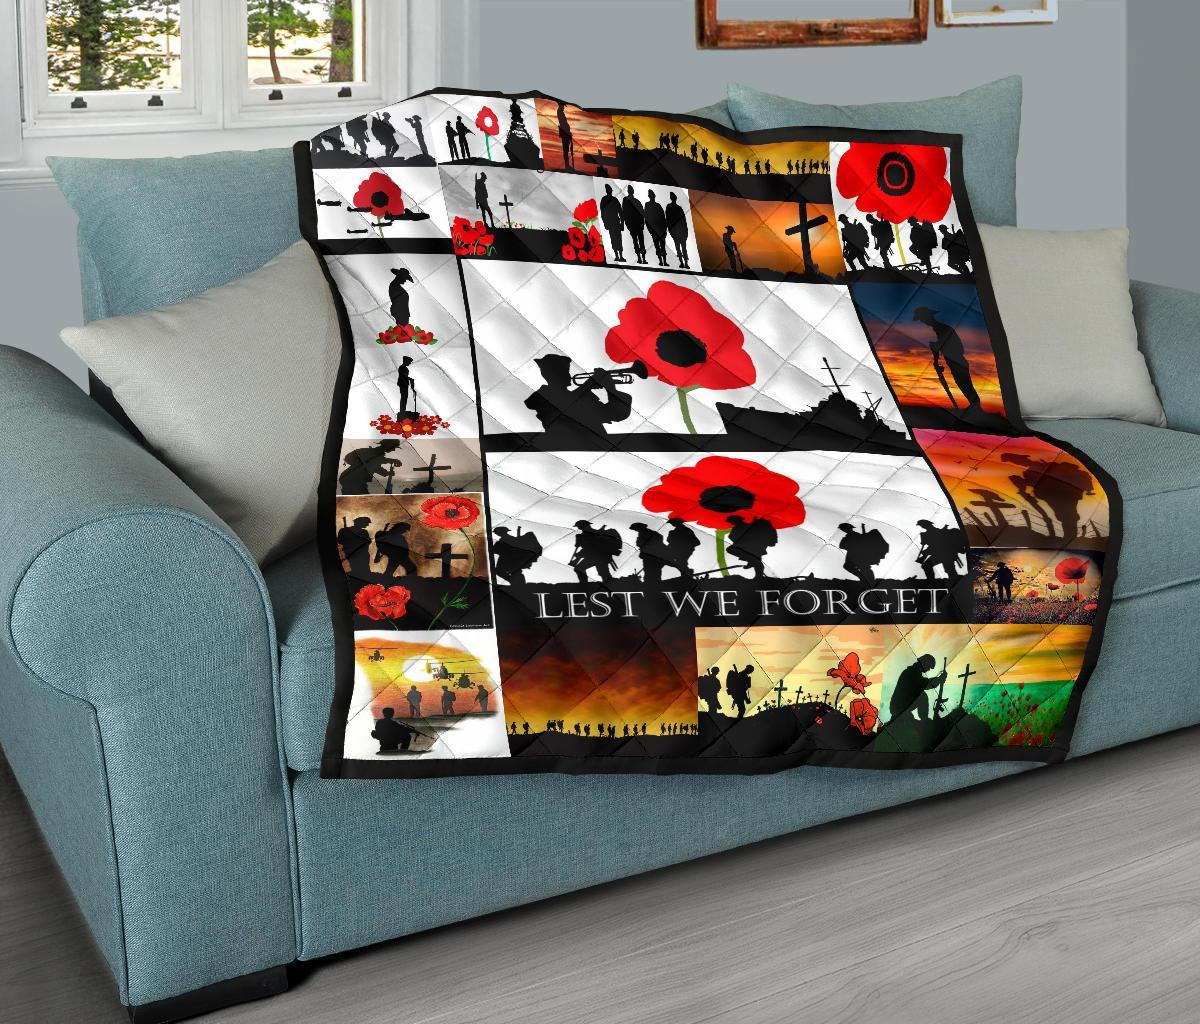 Remembrance day in canada lest we forget quilt 2